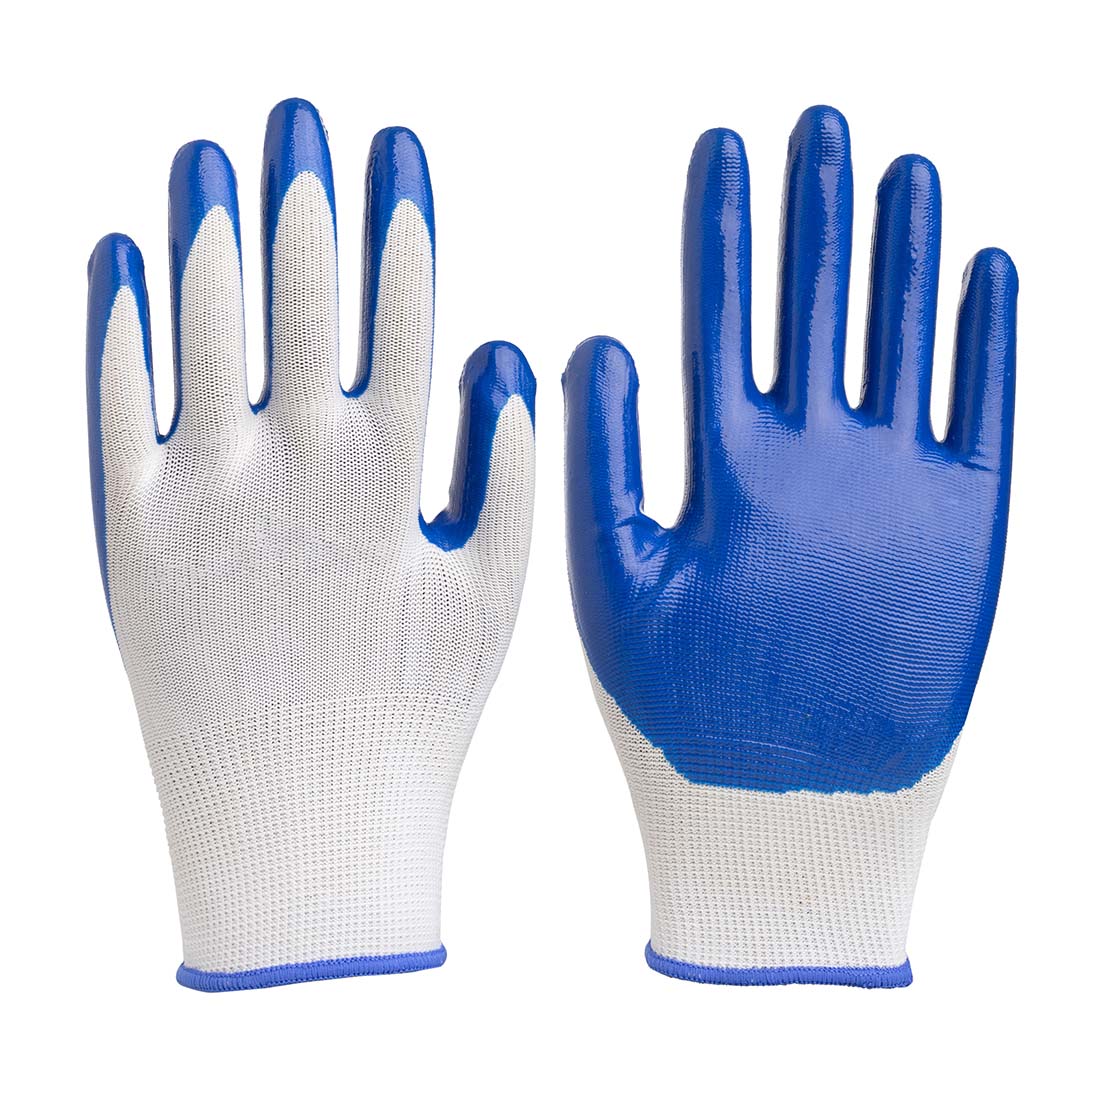 13G polyester glove smooth nitrile palm coated